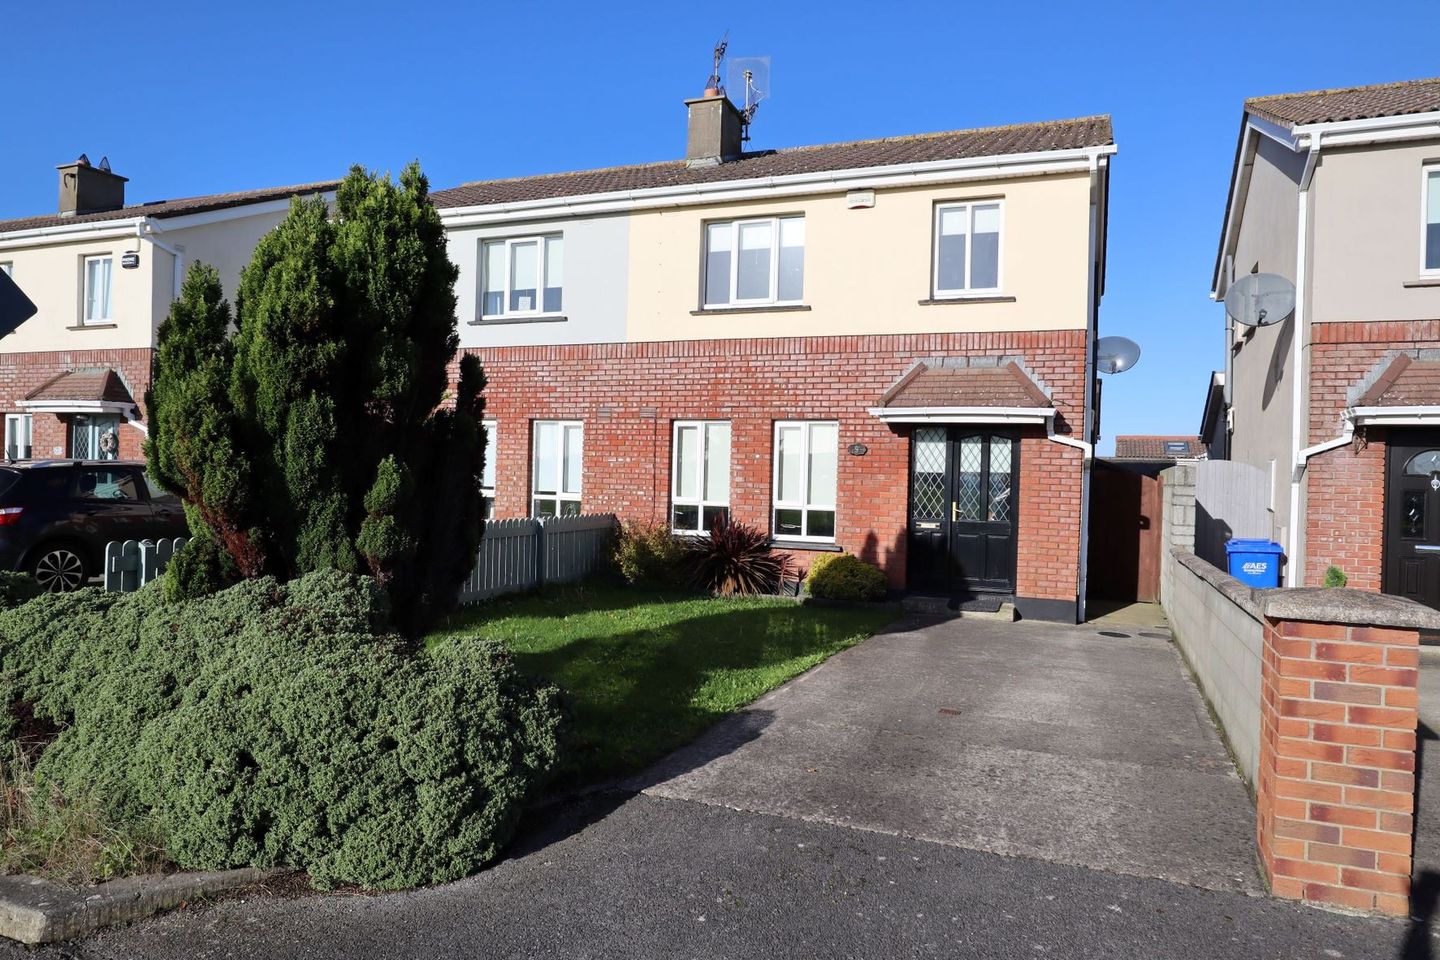 9 The Grove, Inse Bay, Laytown, Co. Meath